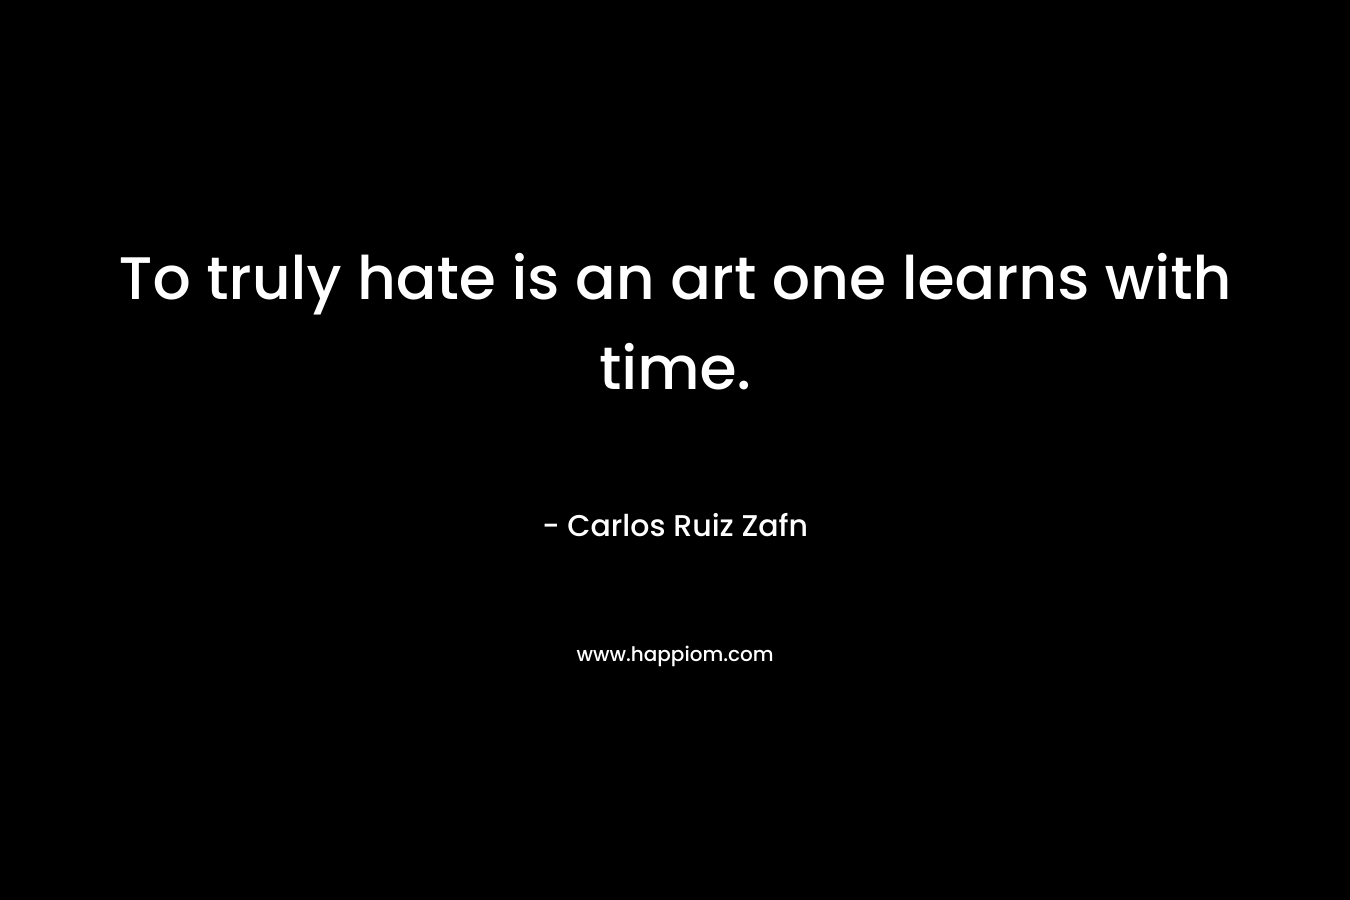 To truly hate is an art one learns with time.